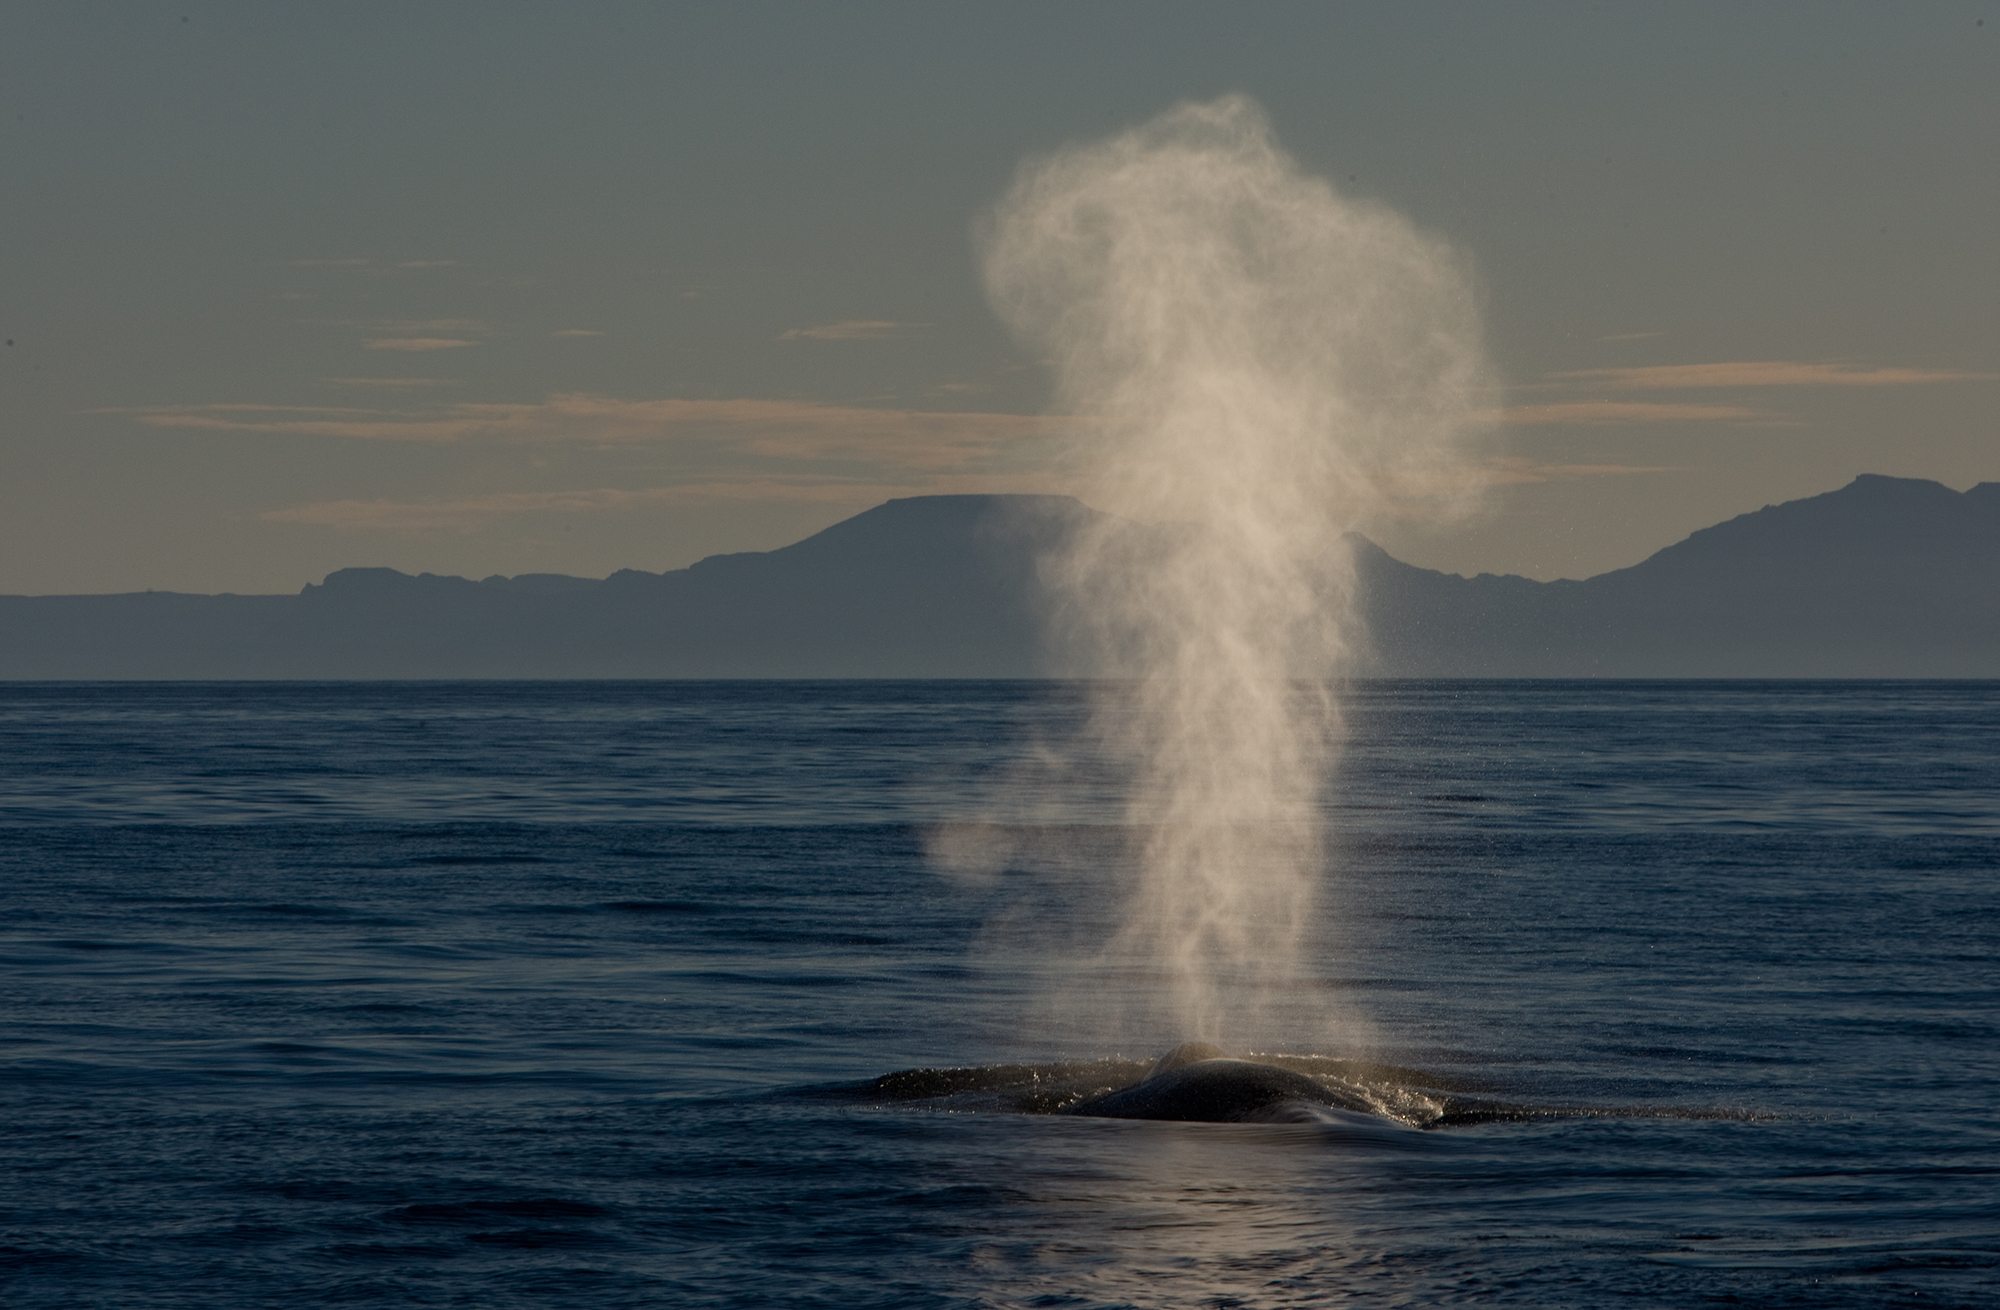 A respiratory opening such as a blowhole in whales